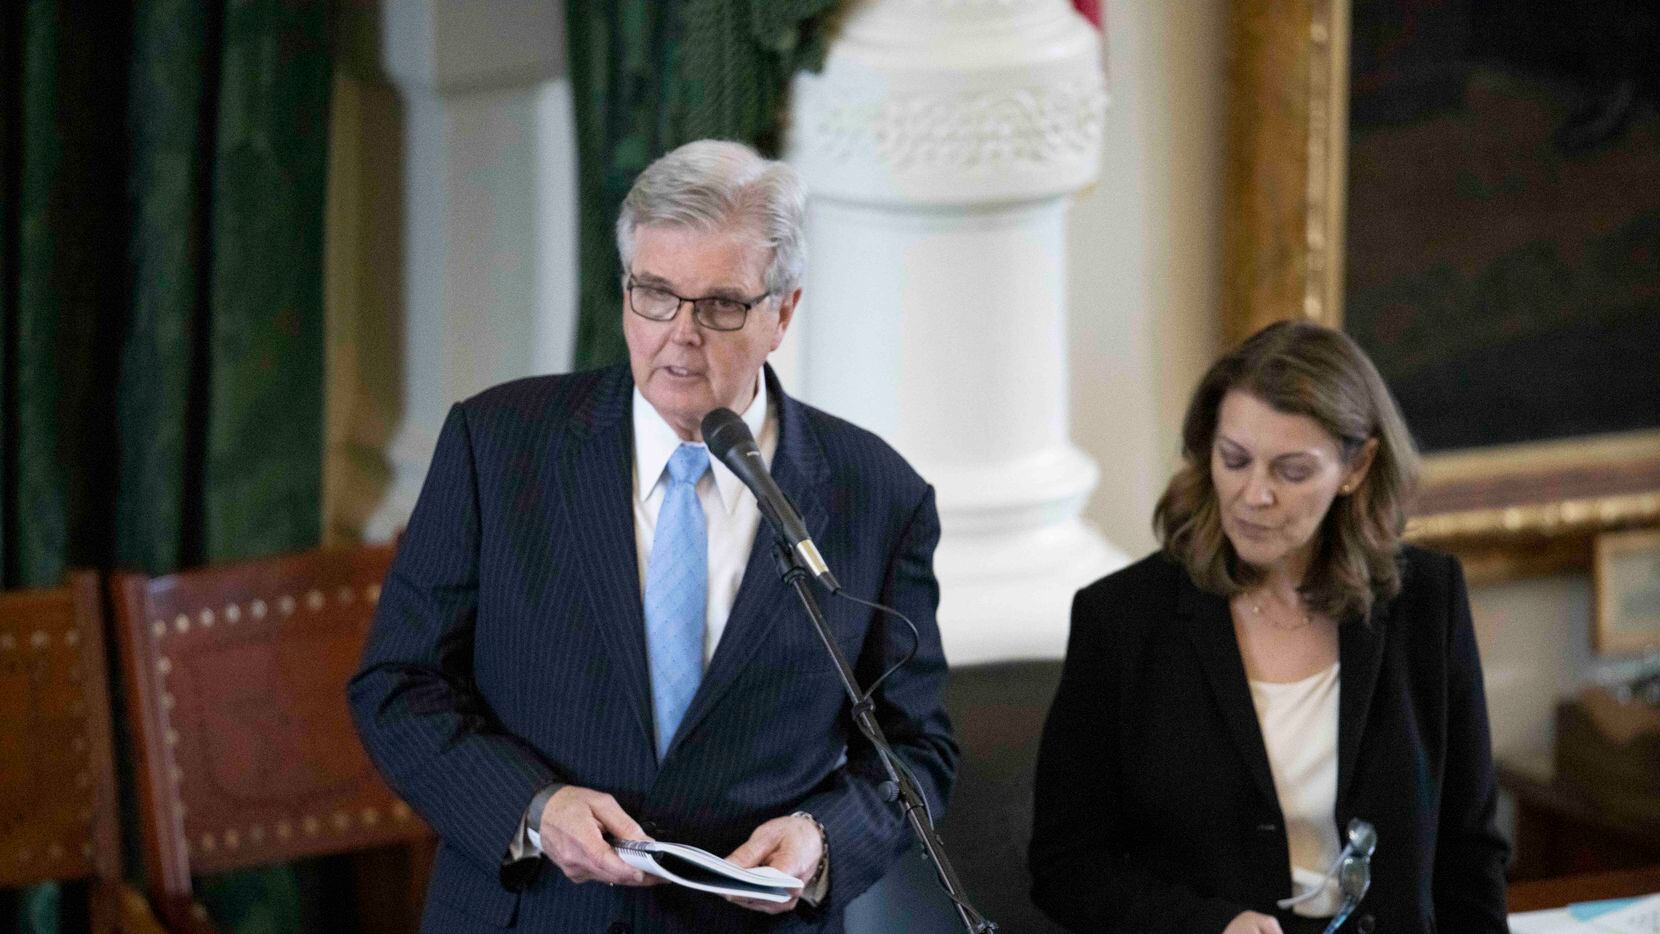 Lt. Gov. Dan Patrick reads from a rule book as Senate Democrats ask pointed questions on a...